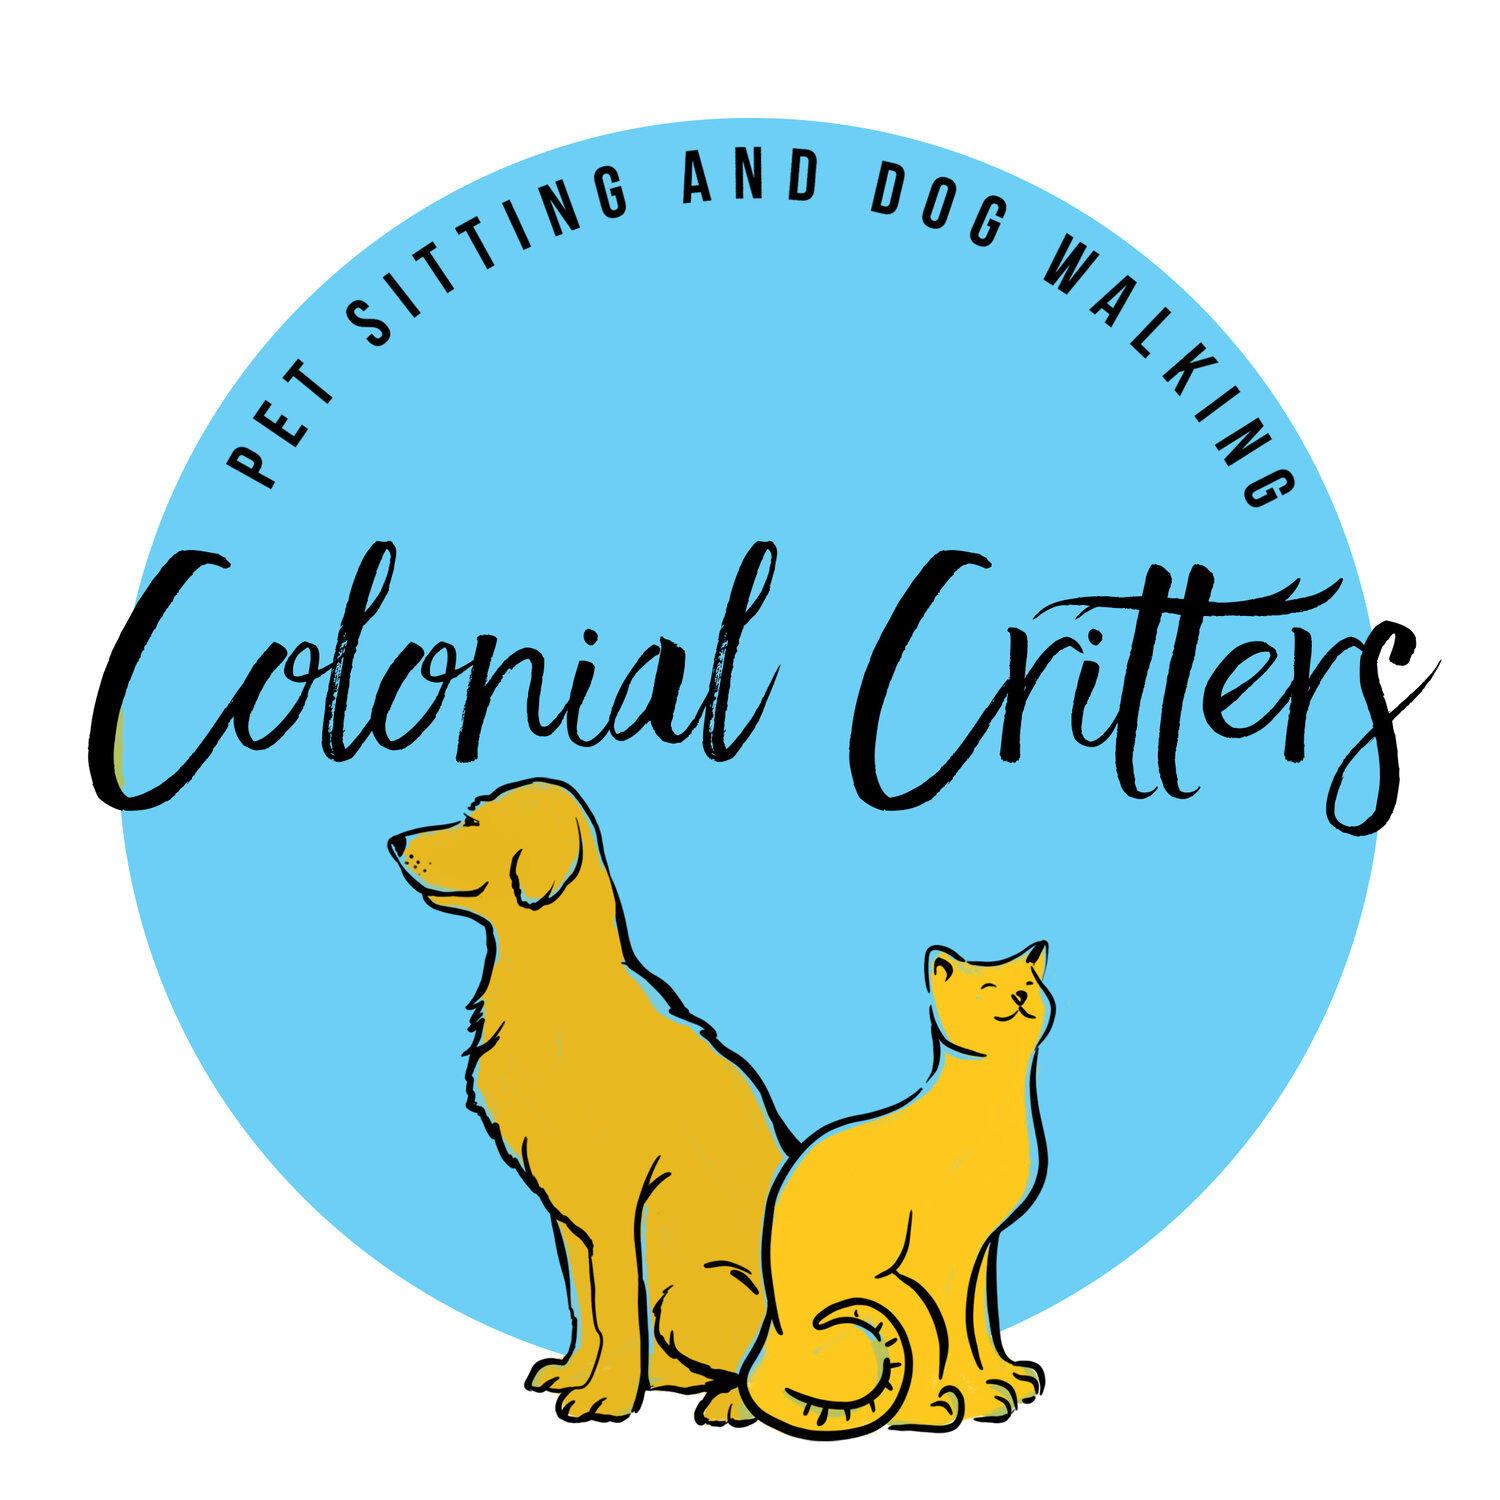 Colonial Critters